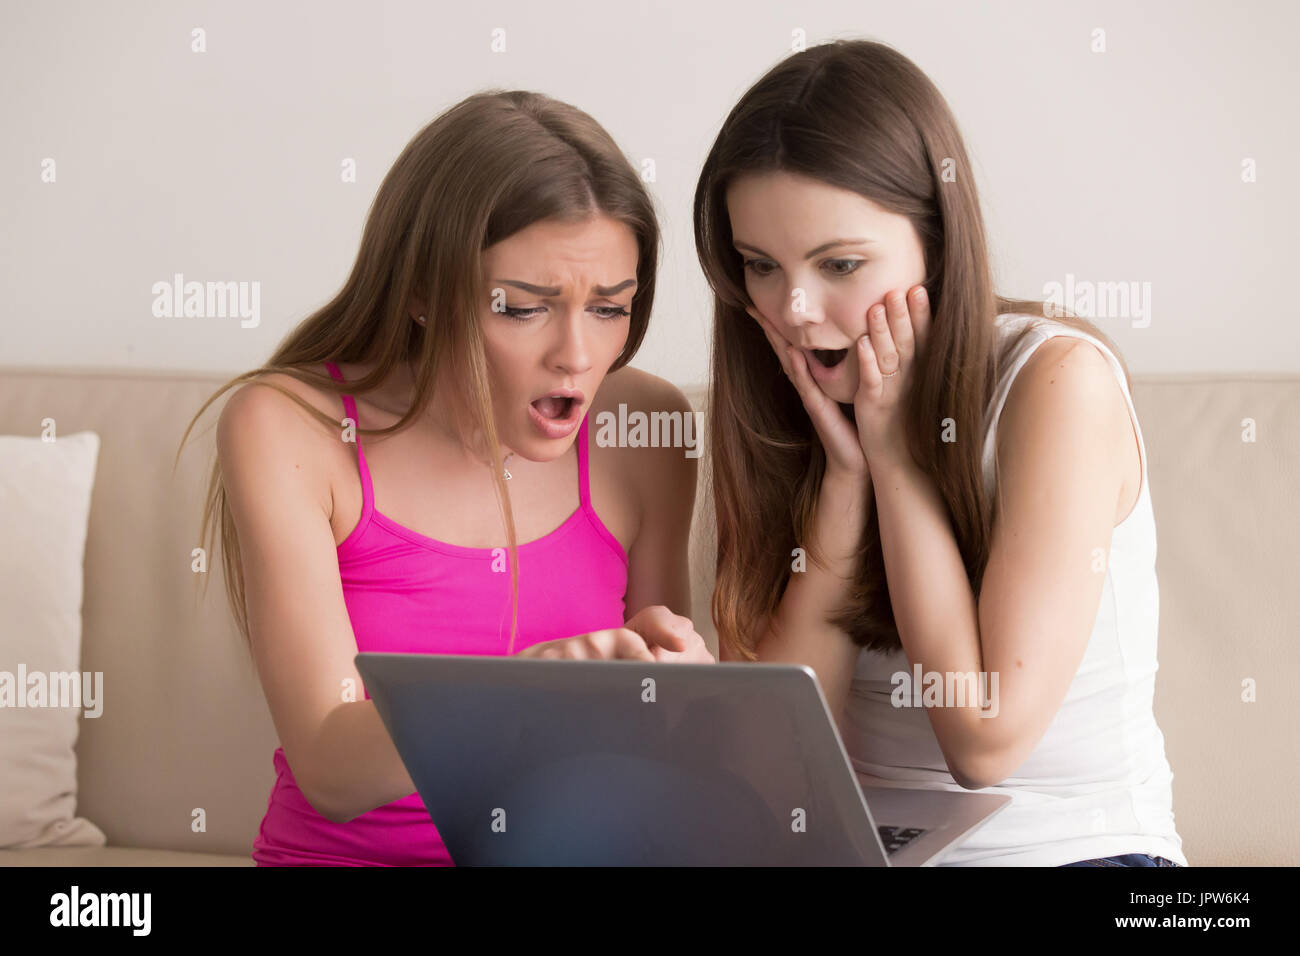 Teens excited with low prices during online sale Stock Photo